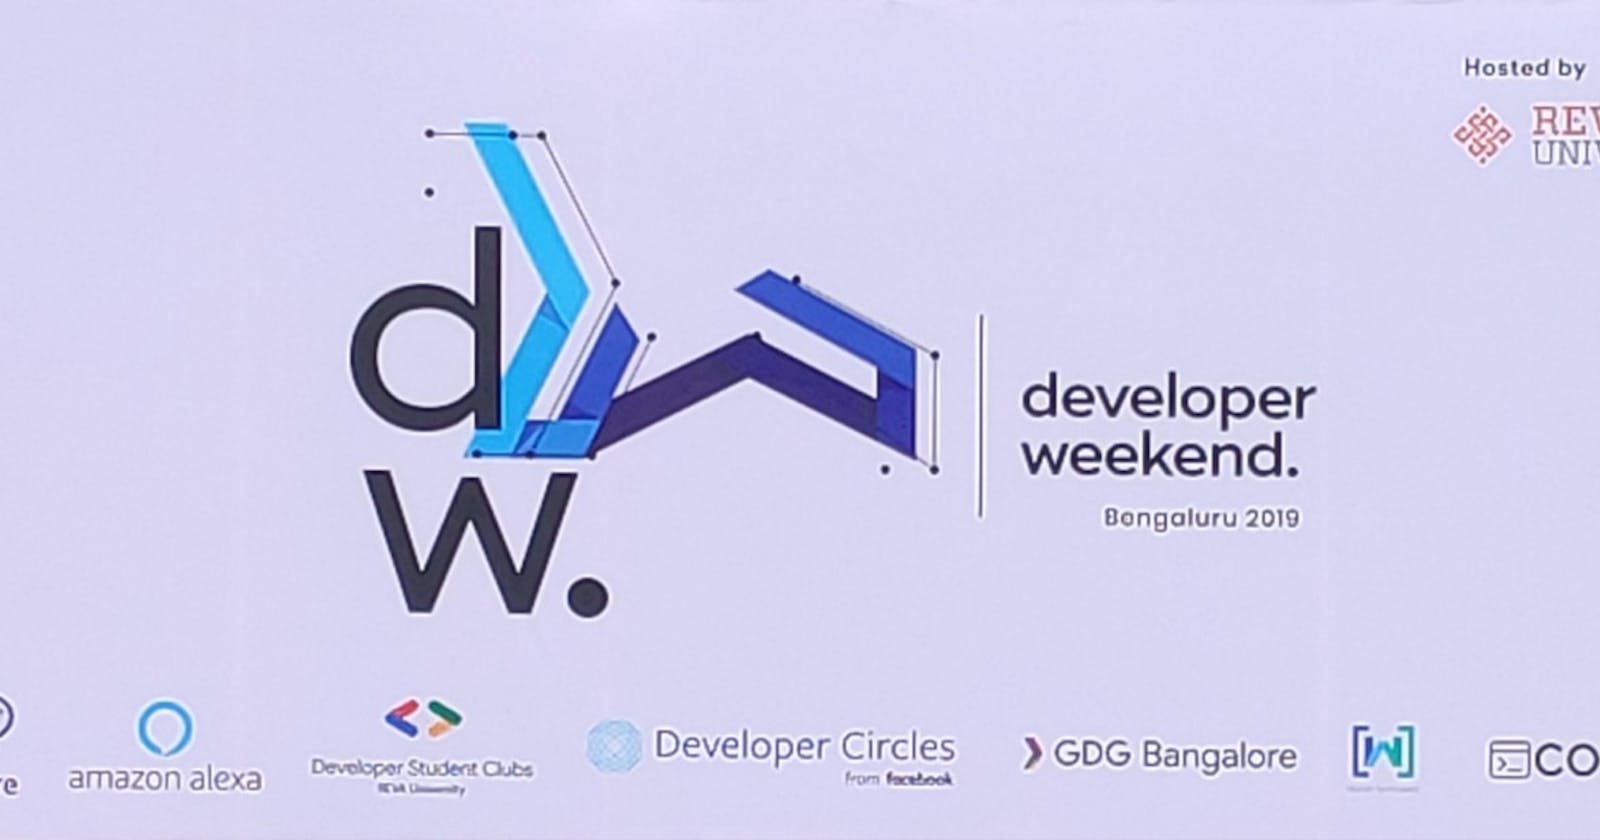 My experience at the Developer Weekend 2019